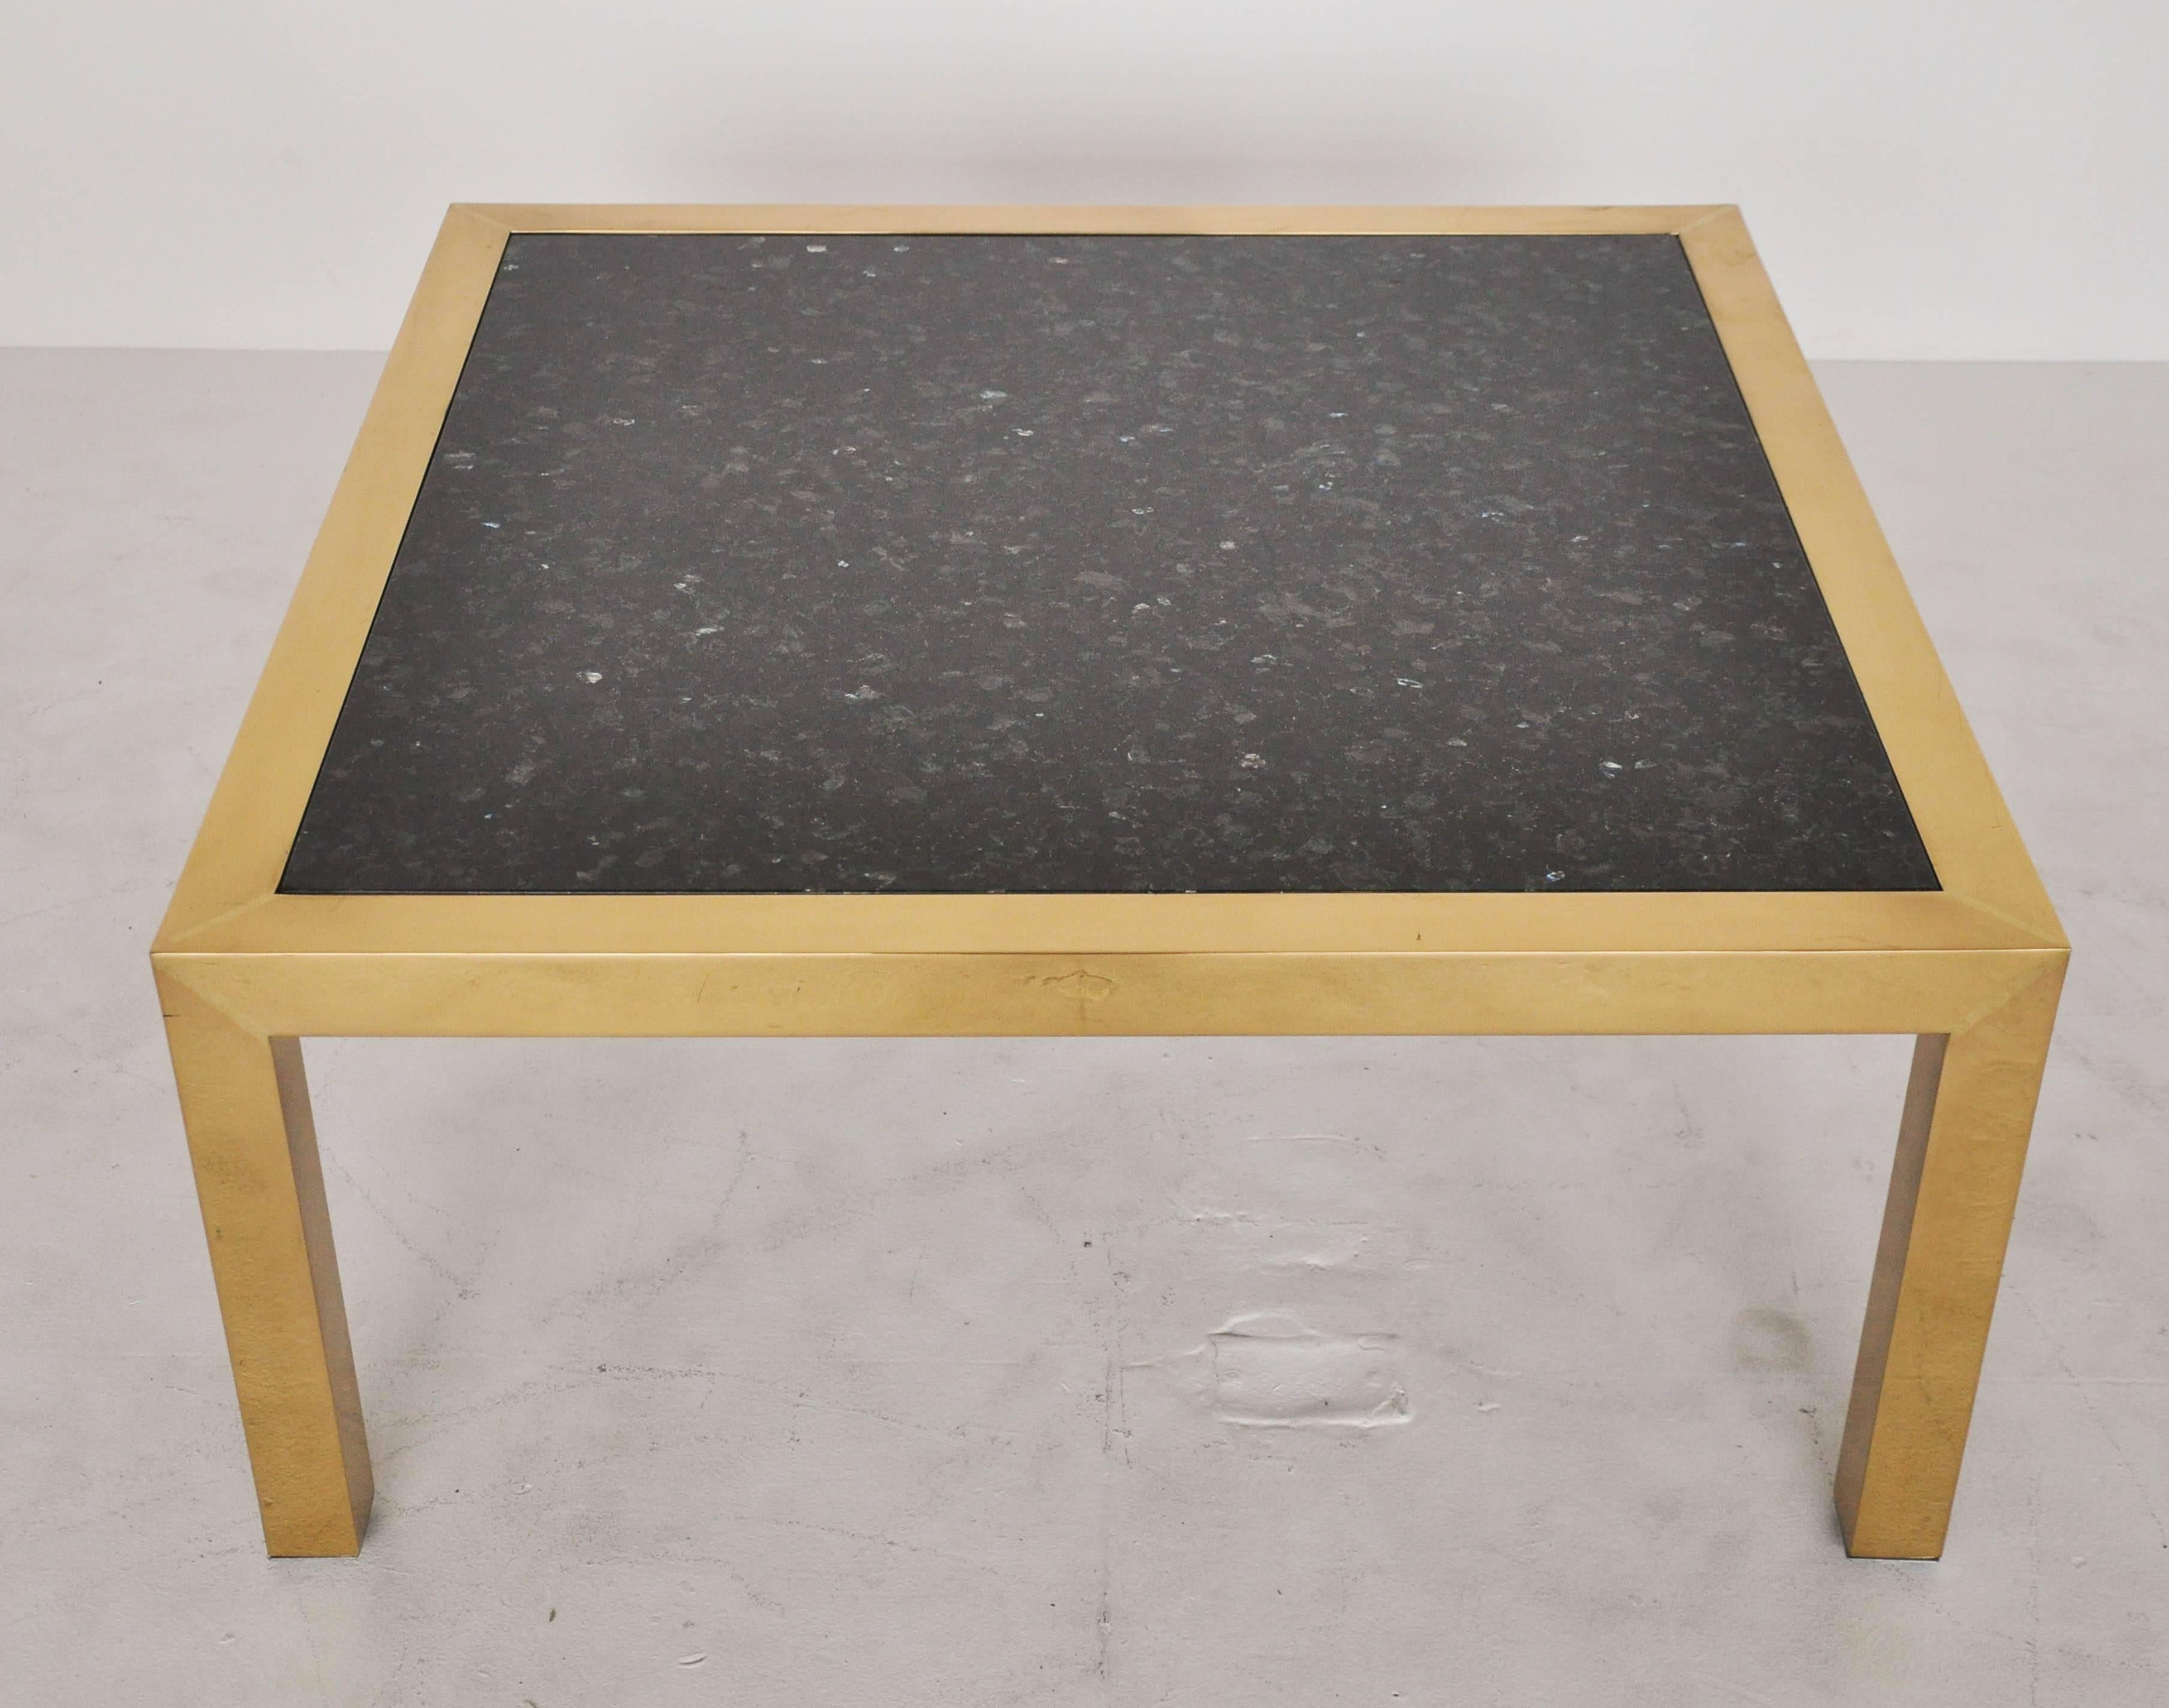 Brass frame coffee table with black granite top, circa 1970s.